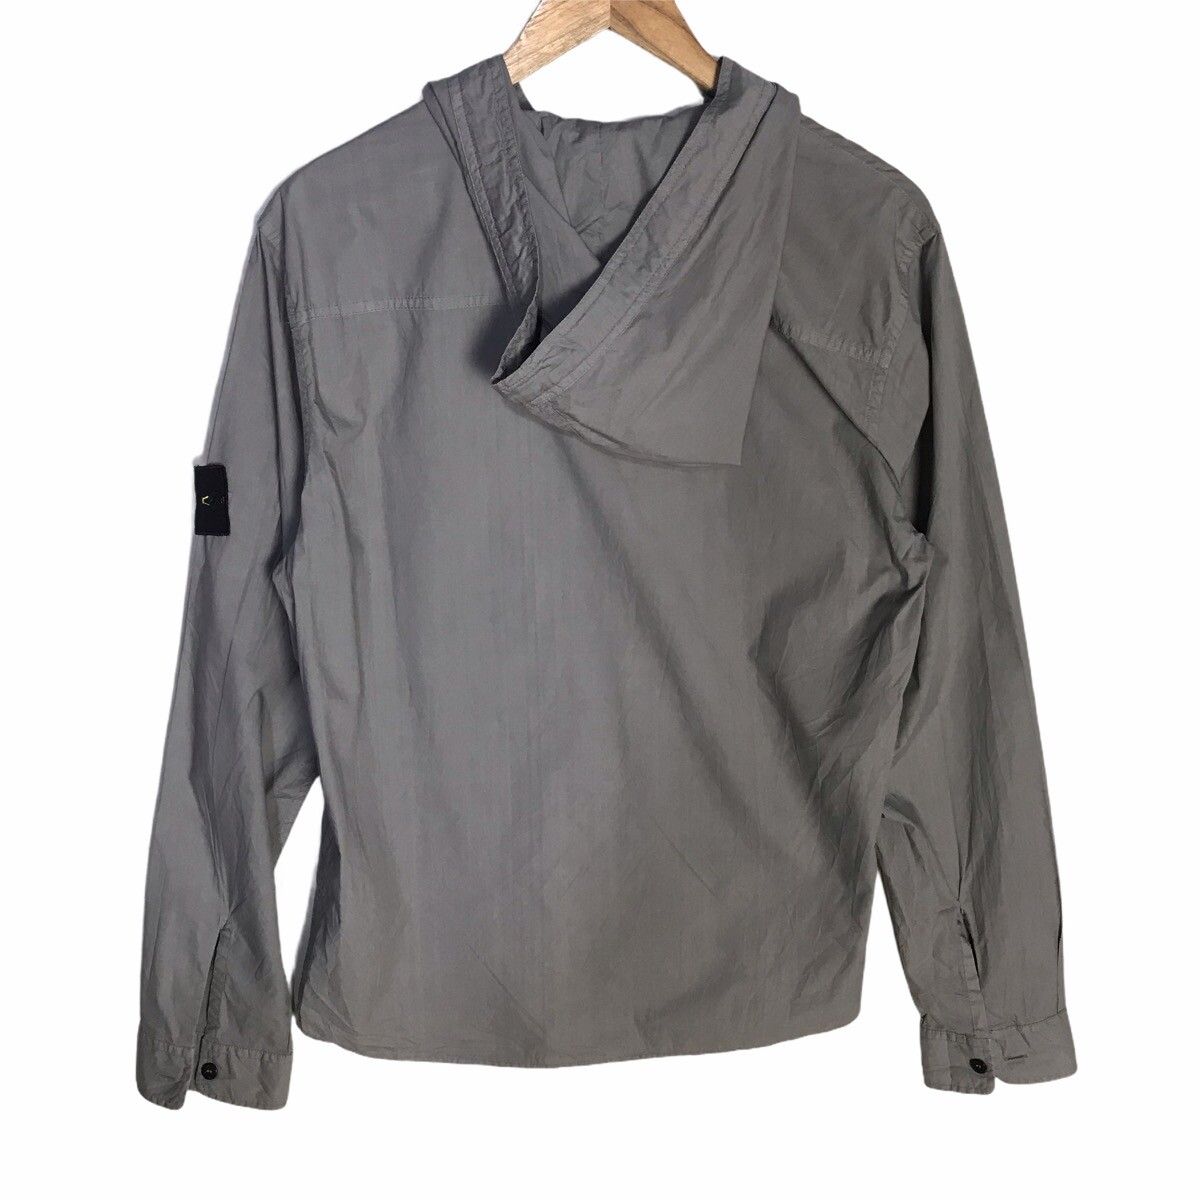 Stone island spring summer 2014 hooded button up shirt - 2